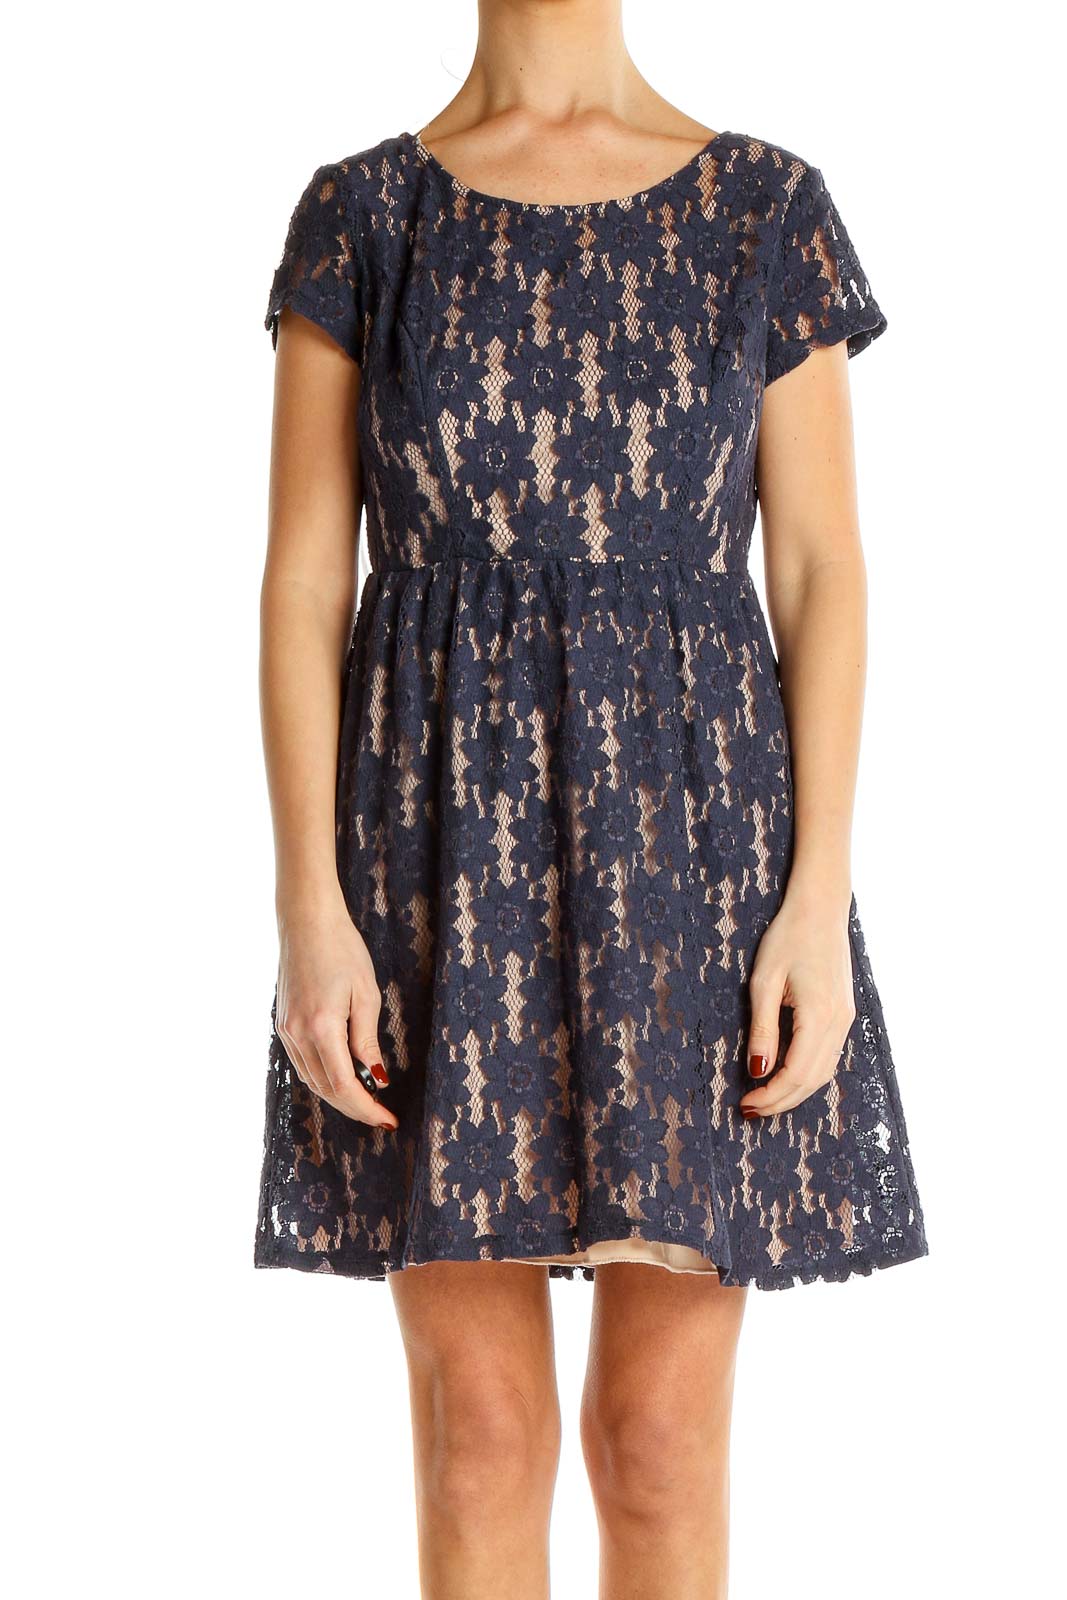 Blue Lace Fit & Flare Dress Front